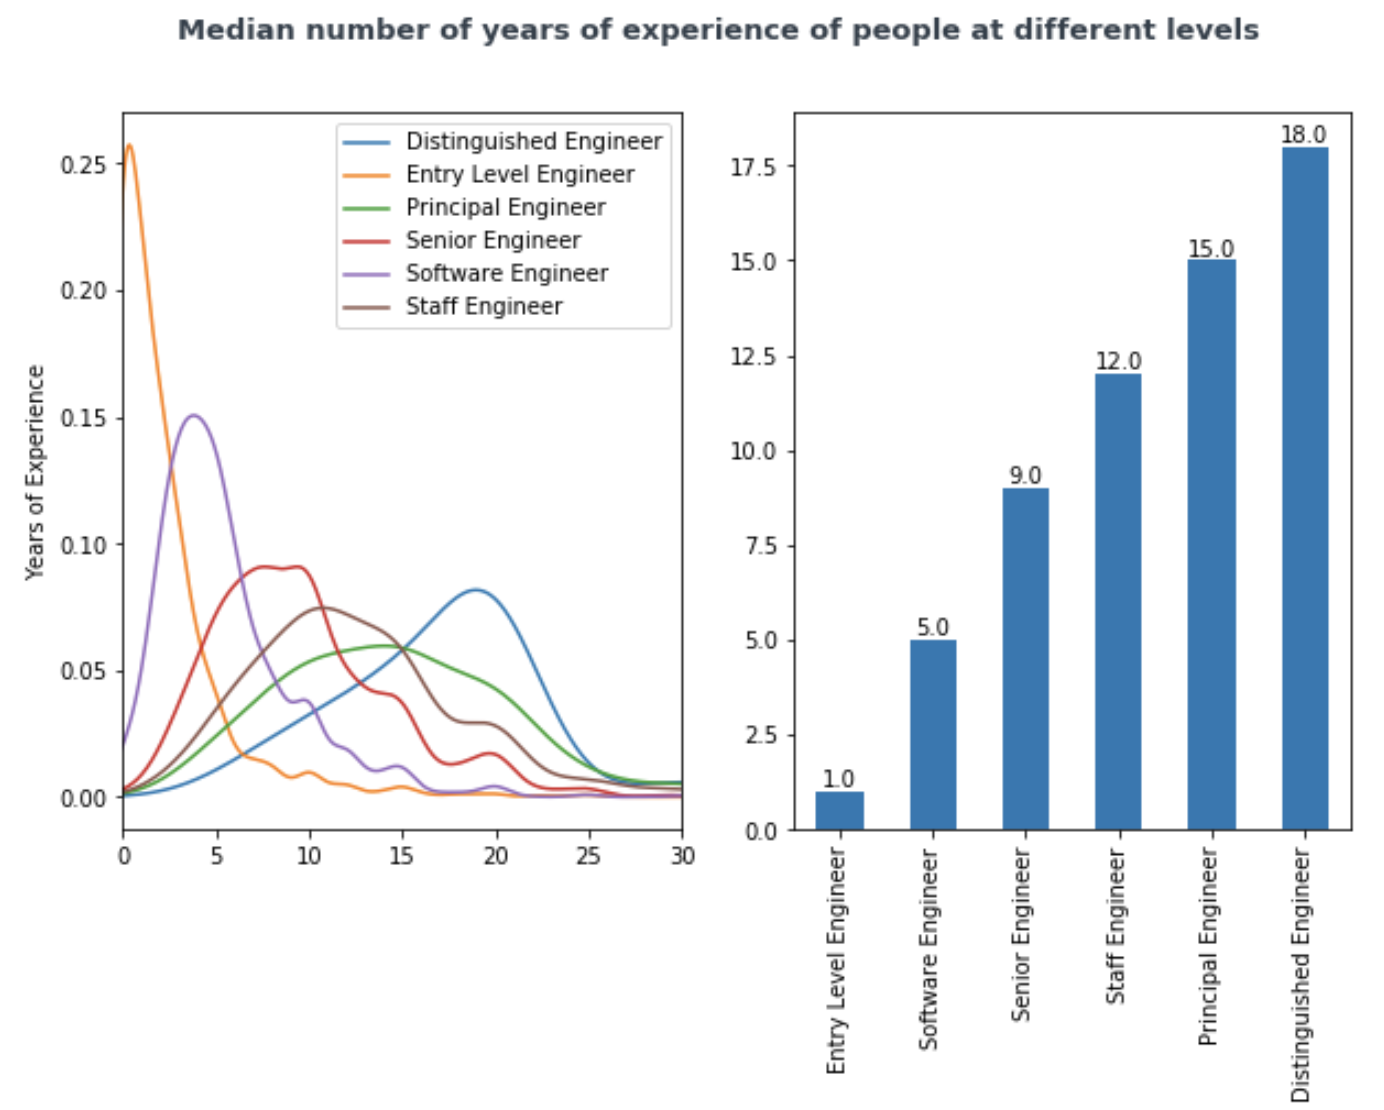 Median years of experience for standard levels